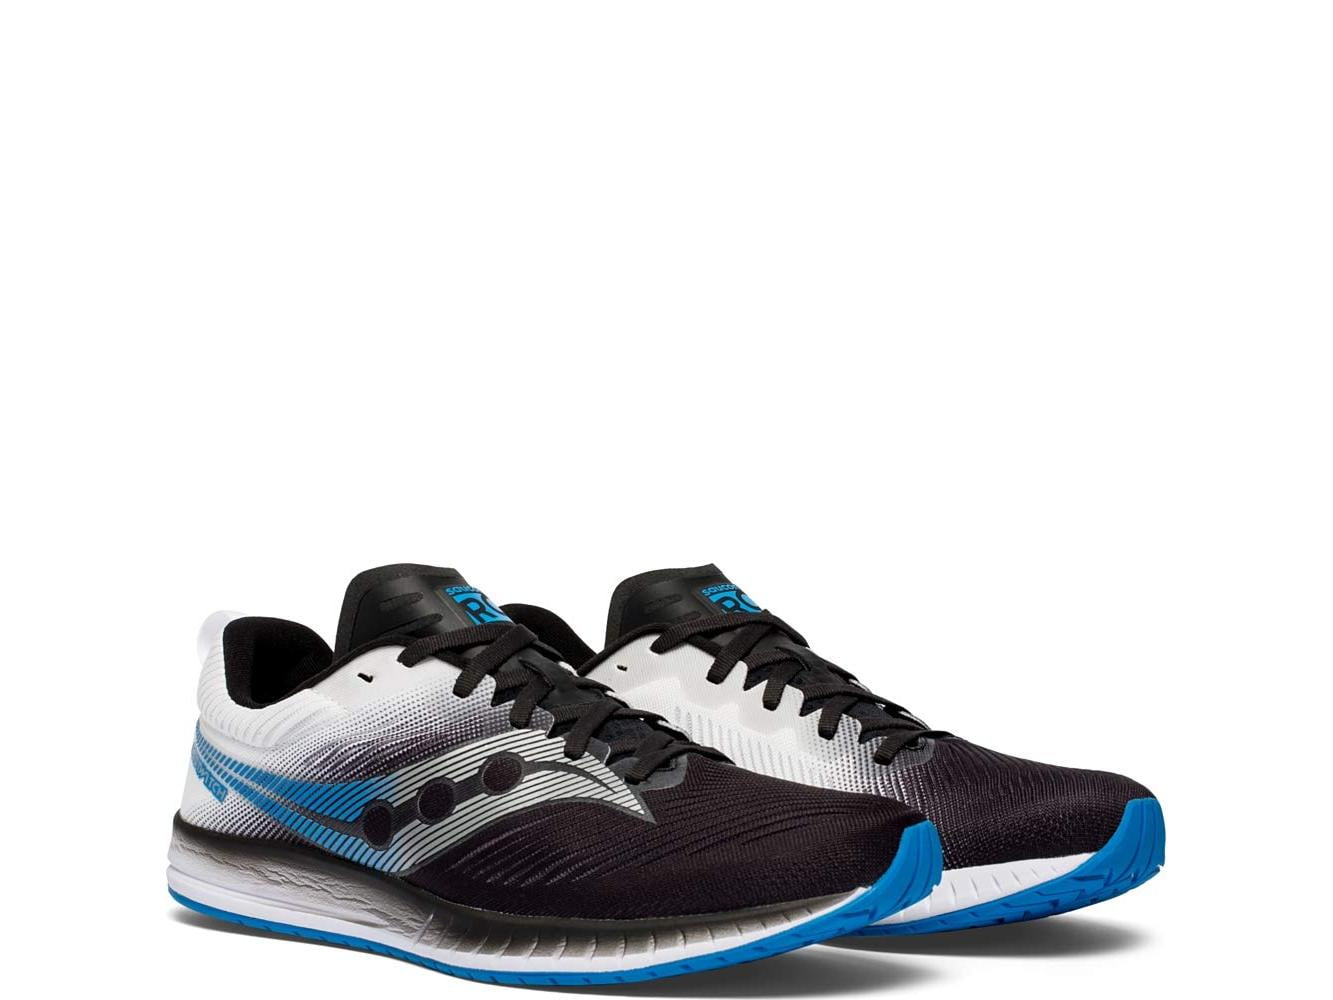 Details about   Saucony Men's Fastwitch 9 Road Running Shoe  12.5 Black/White